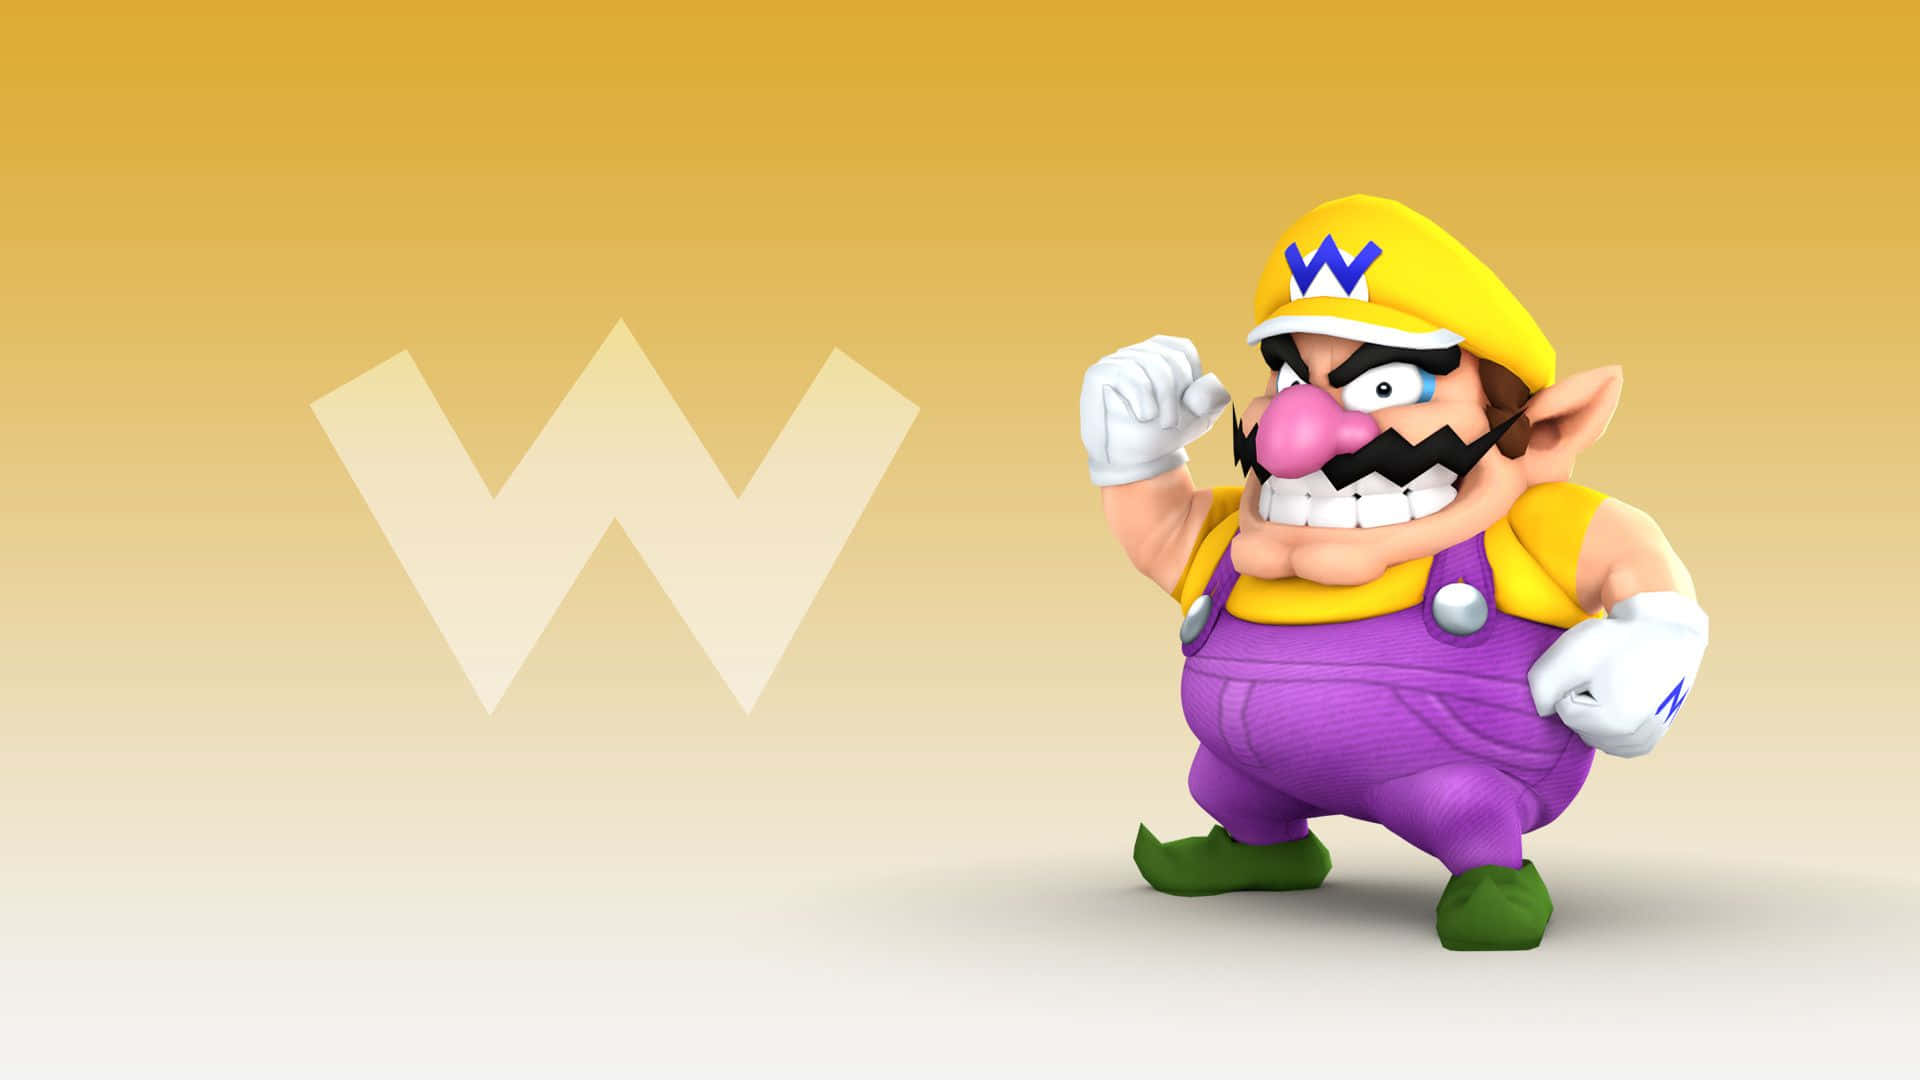 Wario Striking A Pose In The World Of Super Mario Background